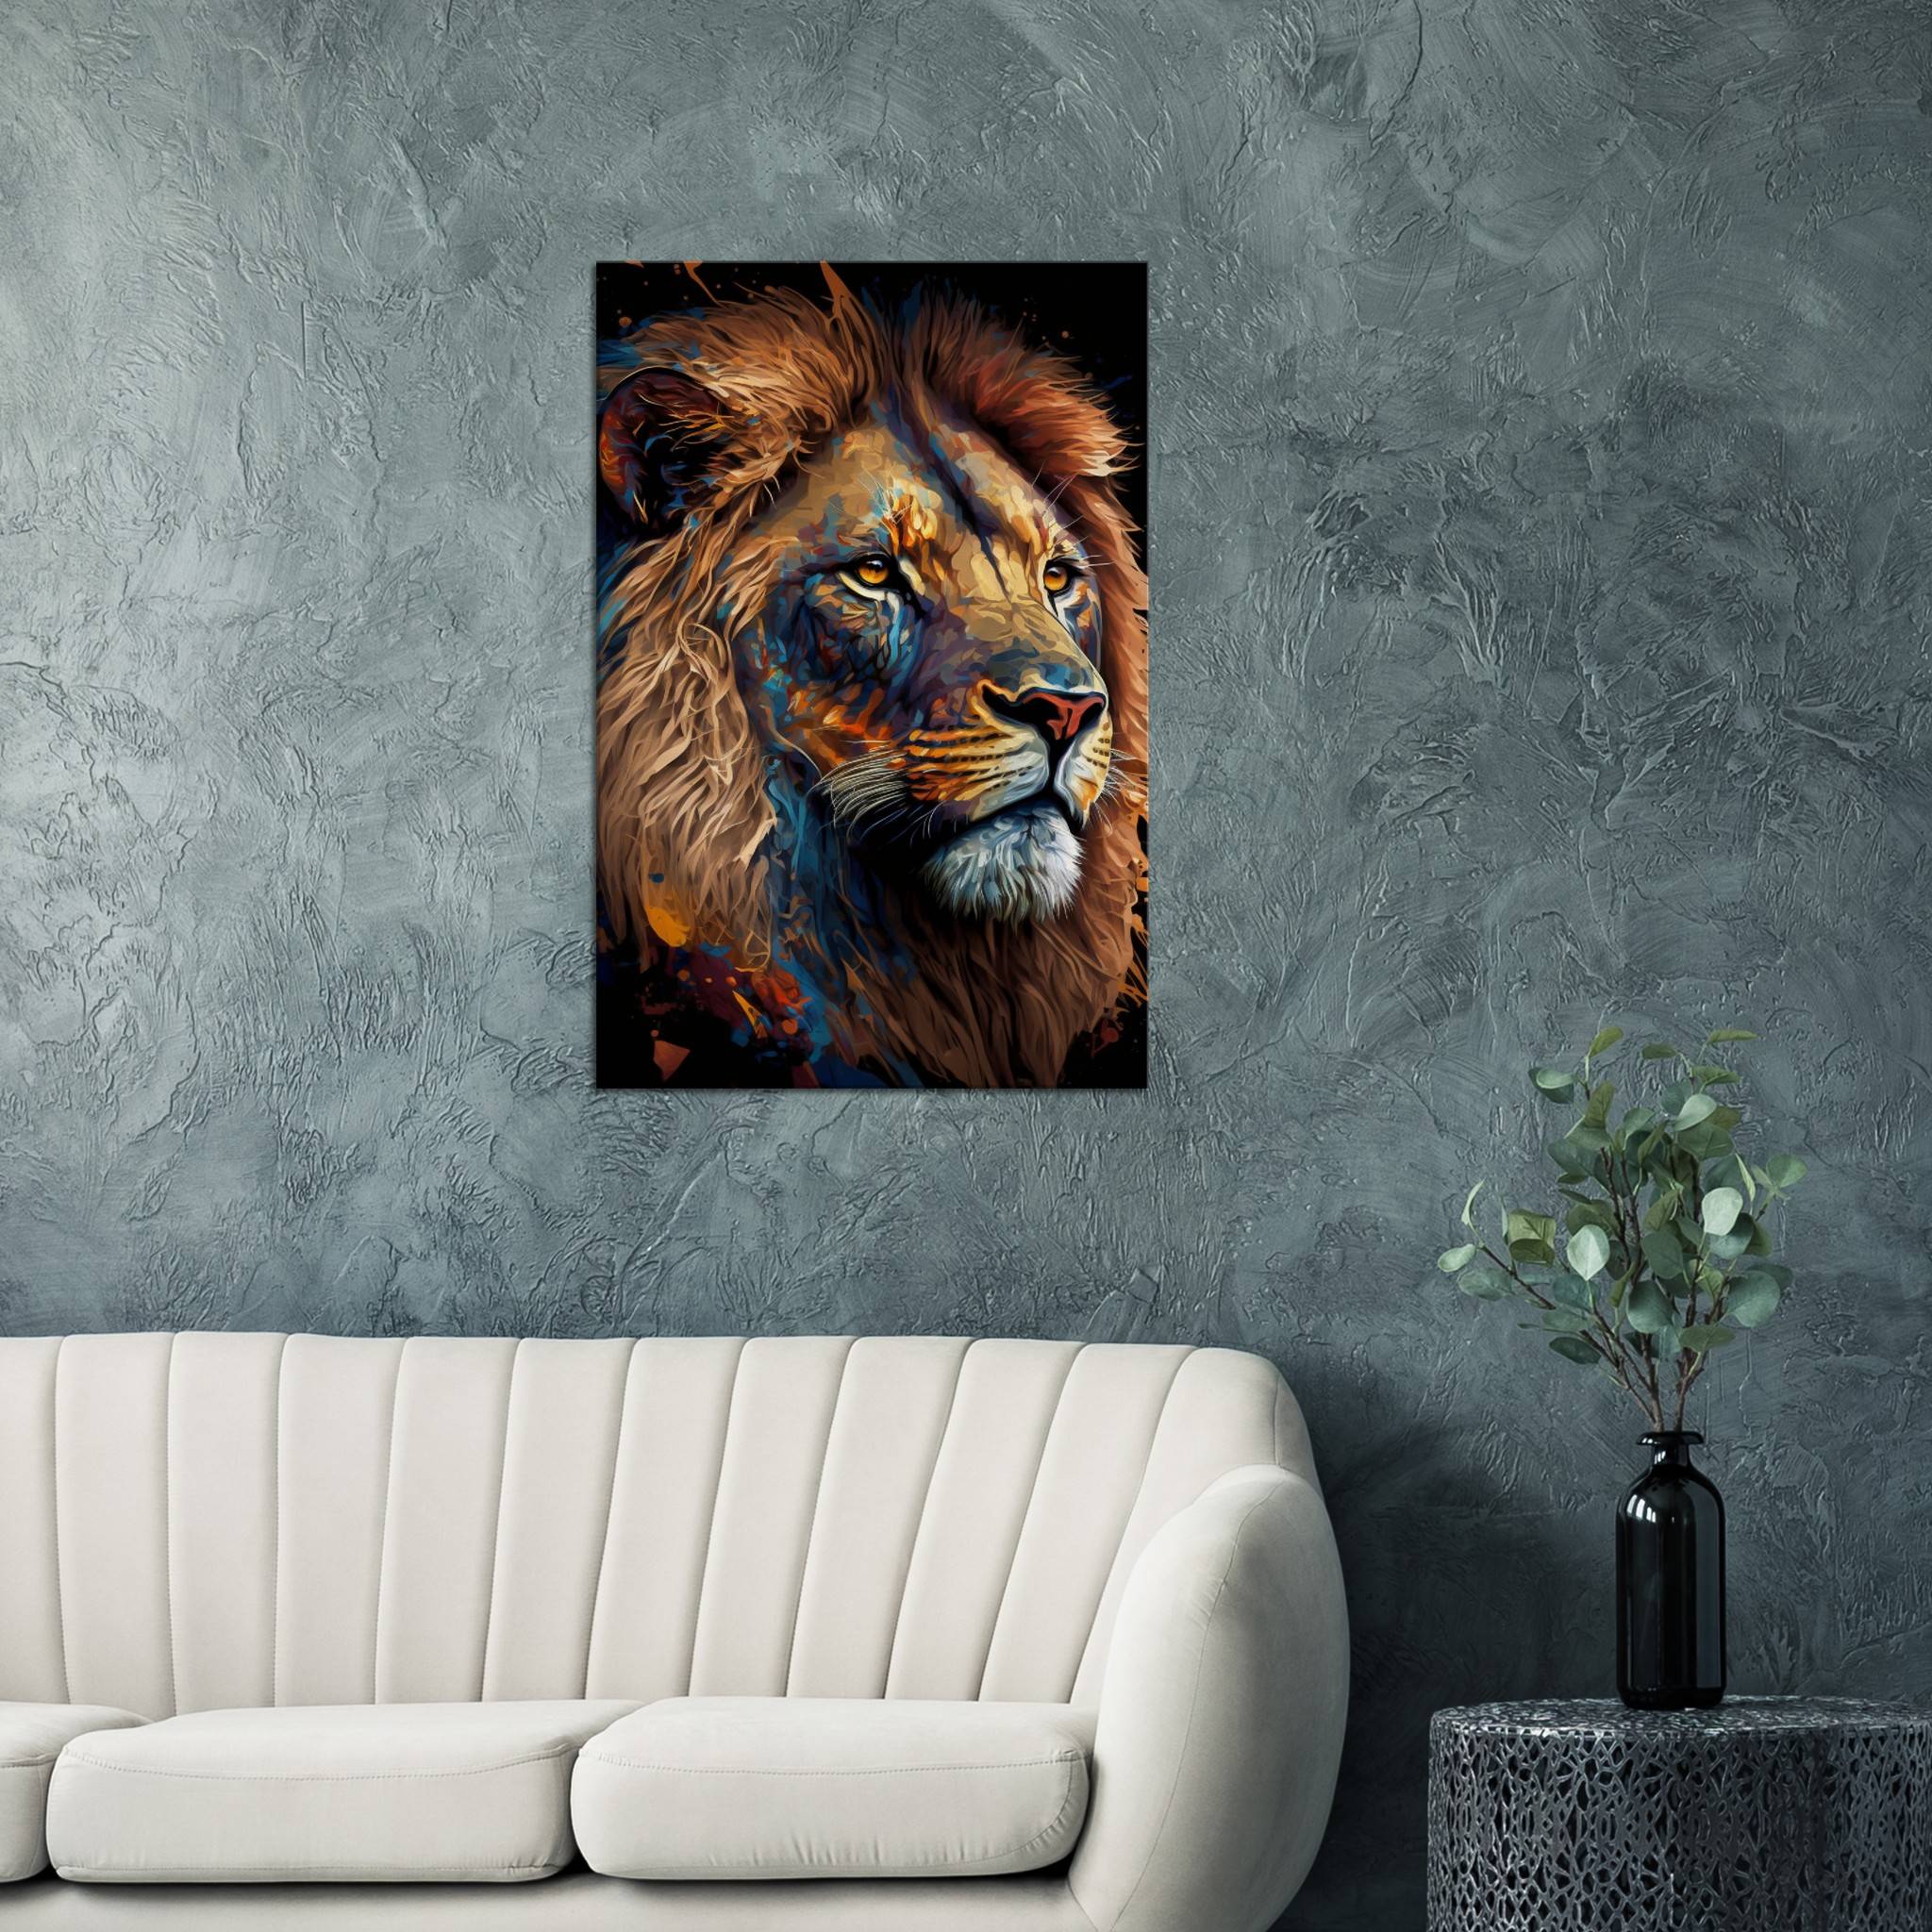 Lion Close to Reality 3 / 50 x 75 cm (Canvas Print) Canvas Print Canvas reproduction The Pianist Print On Demand Fabled Gallery https://fabledgallery.art/product/lion-close-to-reality-3-50-x-75-cm-canvas-print/